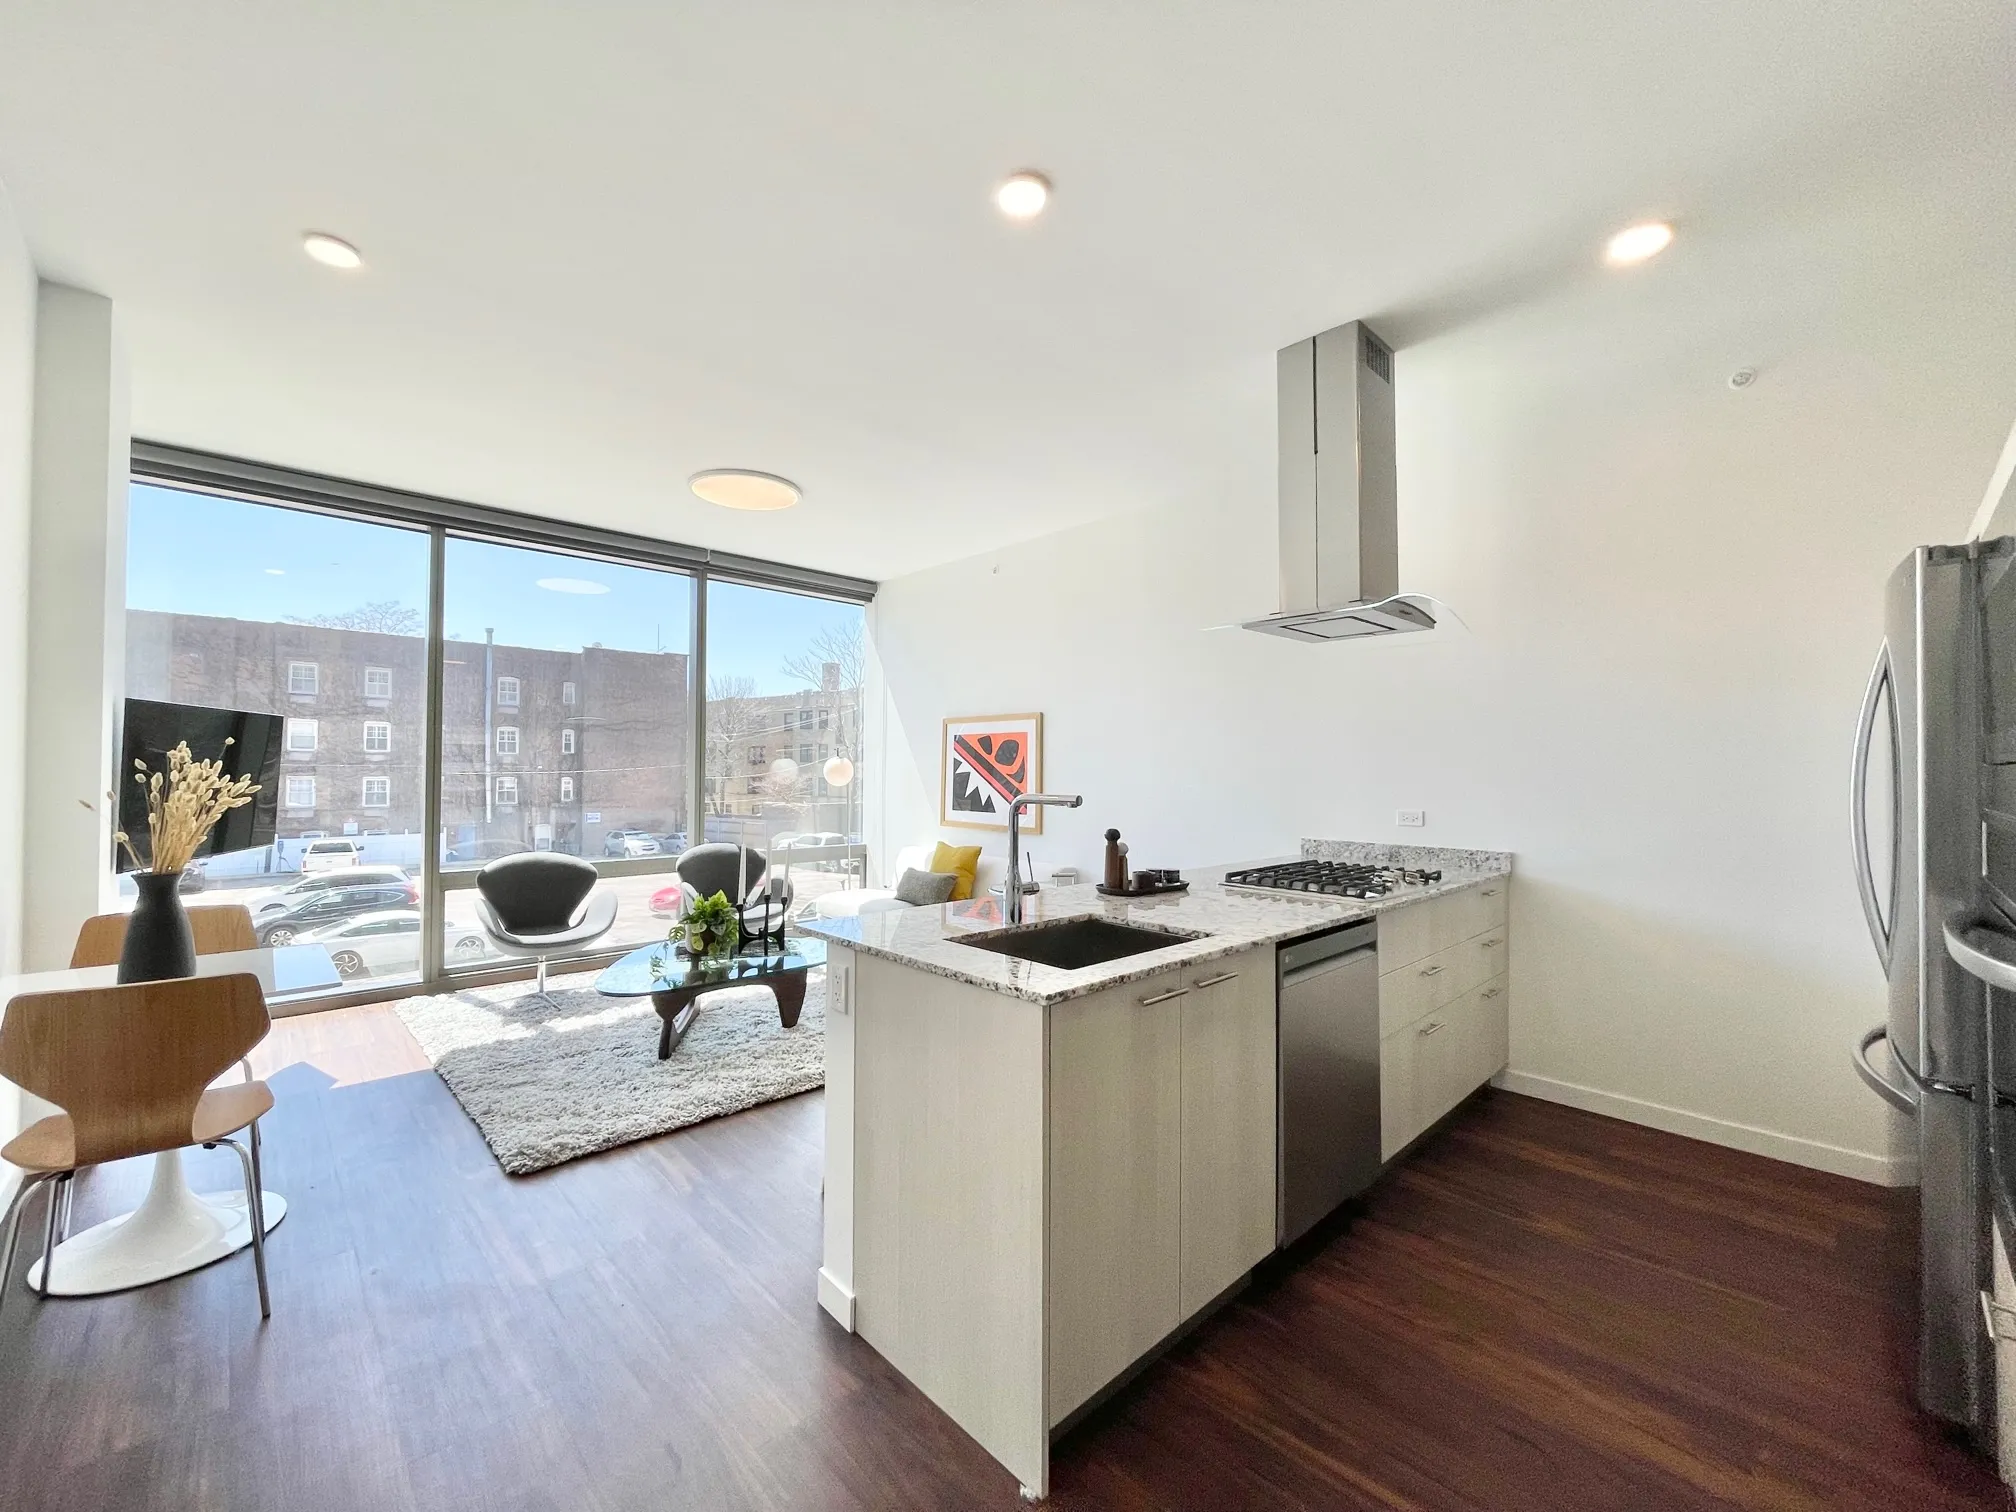 3478 N BROADWAY 60613-Lakeview Luxury Apartment-unit#Apt1-Chicago-IL